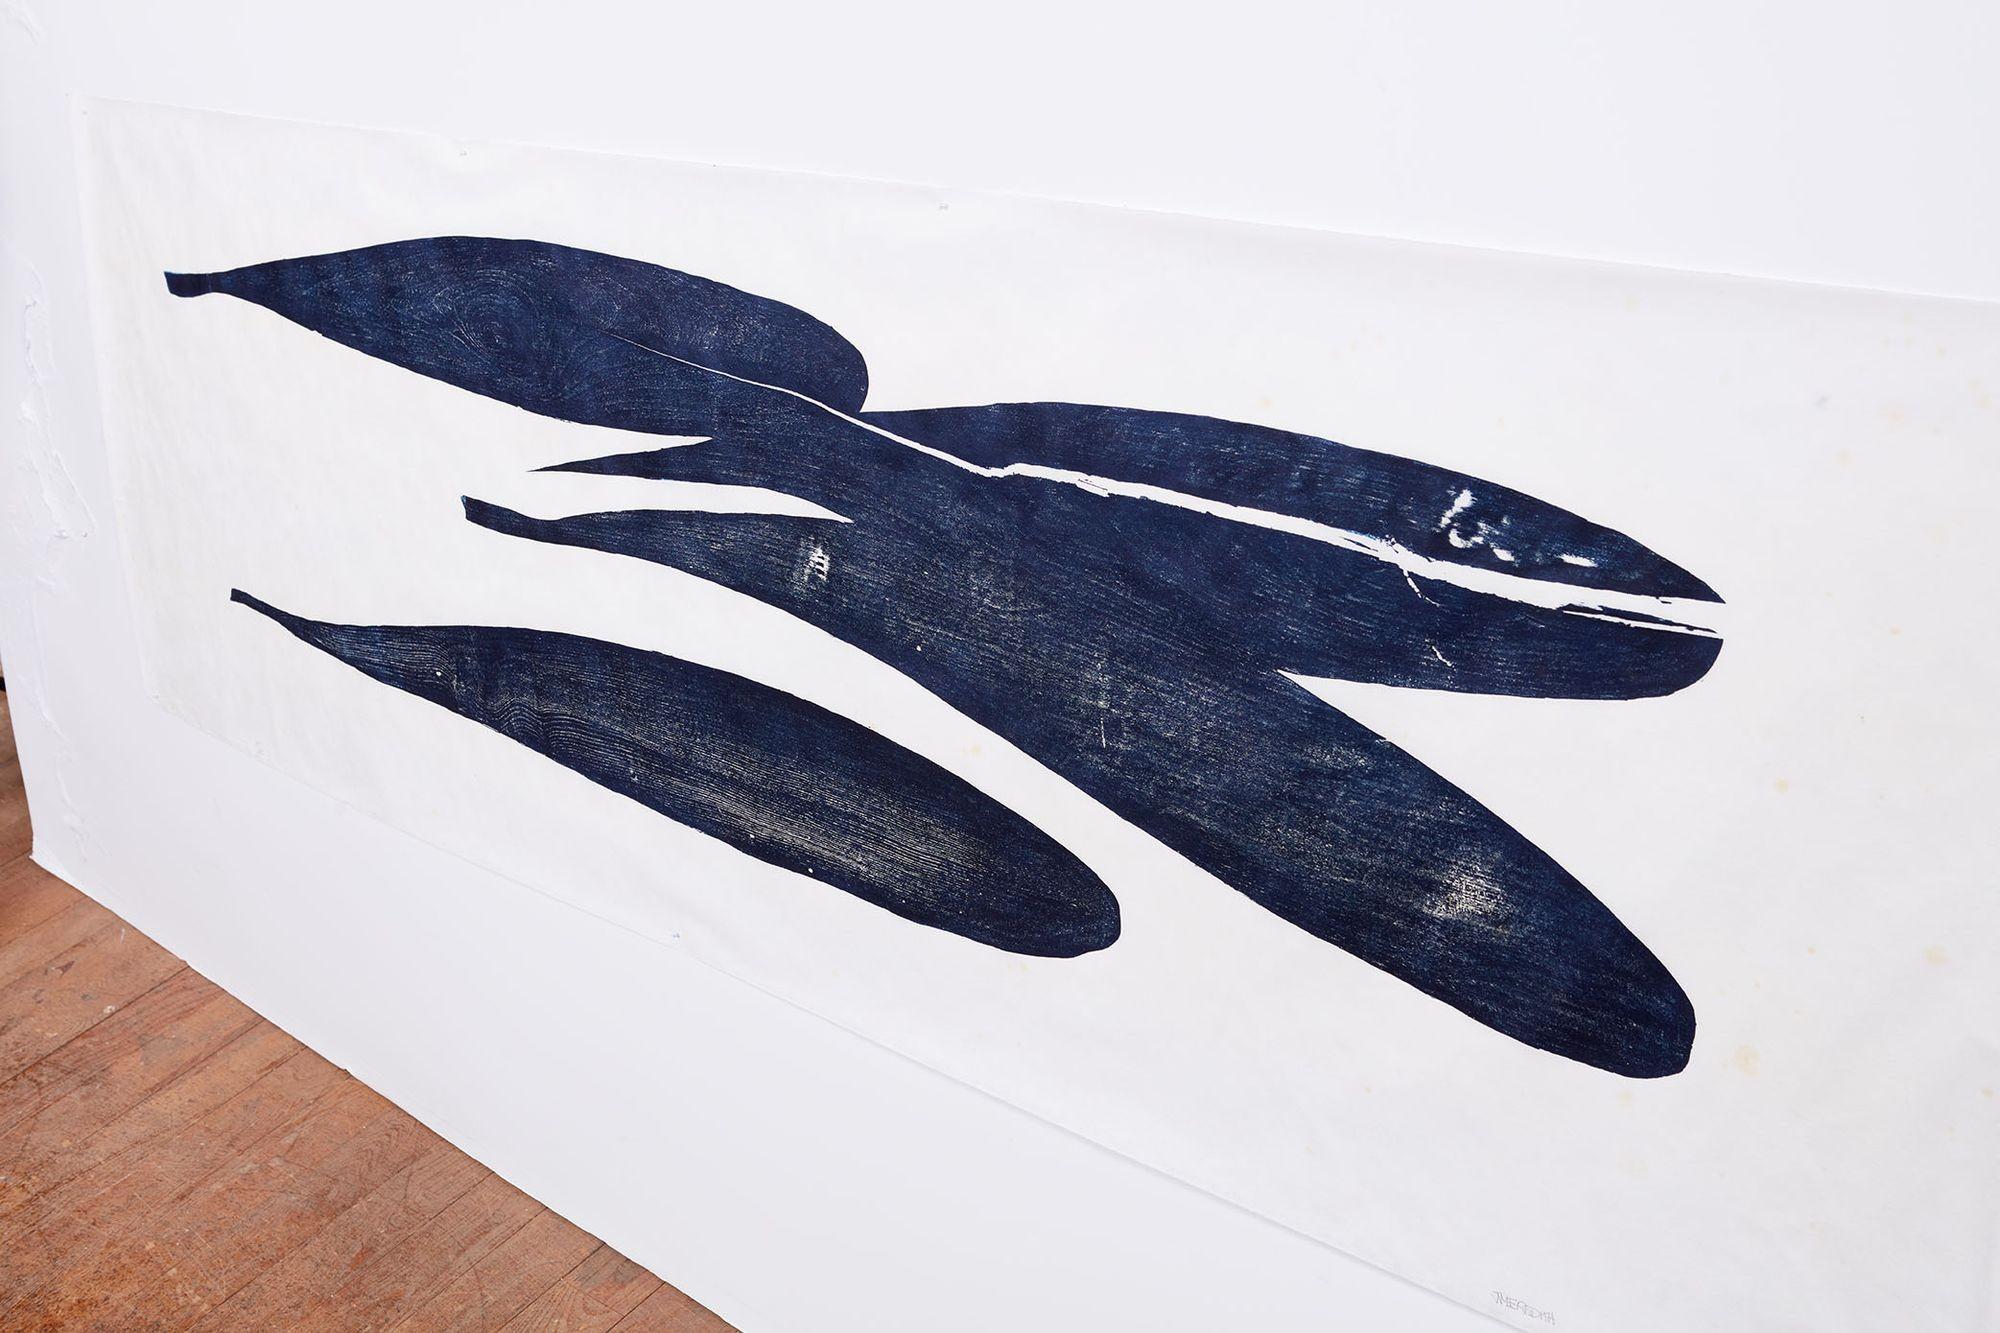 A large woodblock by British artist Julian Meredith, entitled 'pilot pod'. The woodblock is a very limited edition print (17/20) made by the artist on rice paper and colored with indigo ink. Meredith is noted for his beautiful depictions of whales